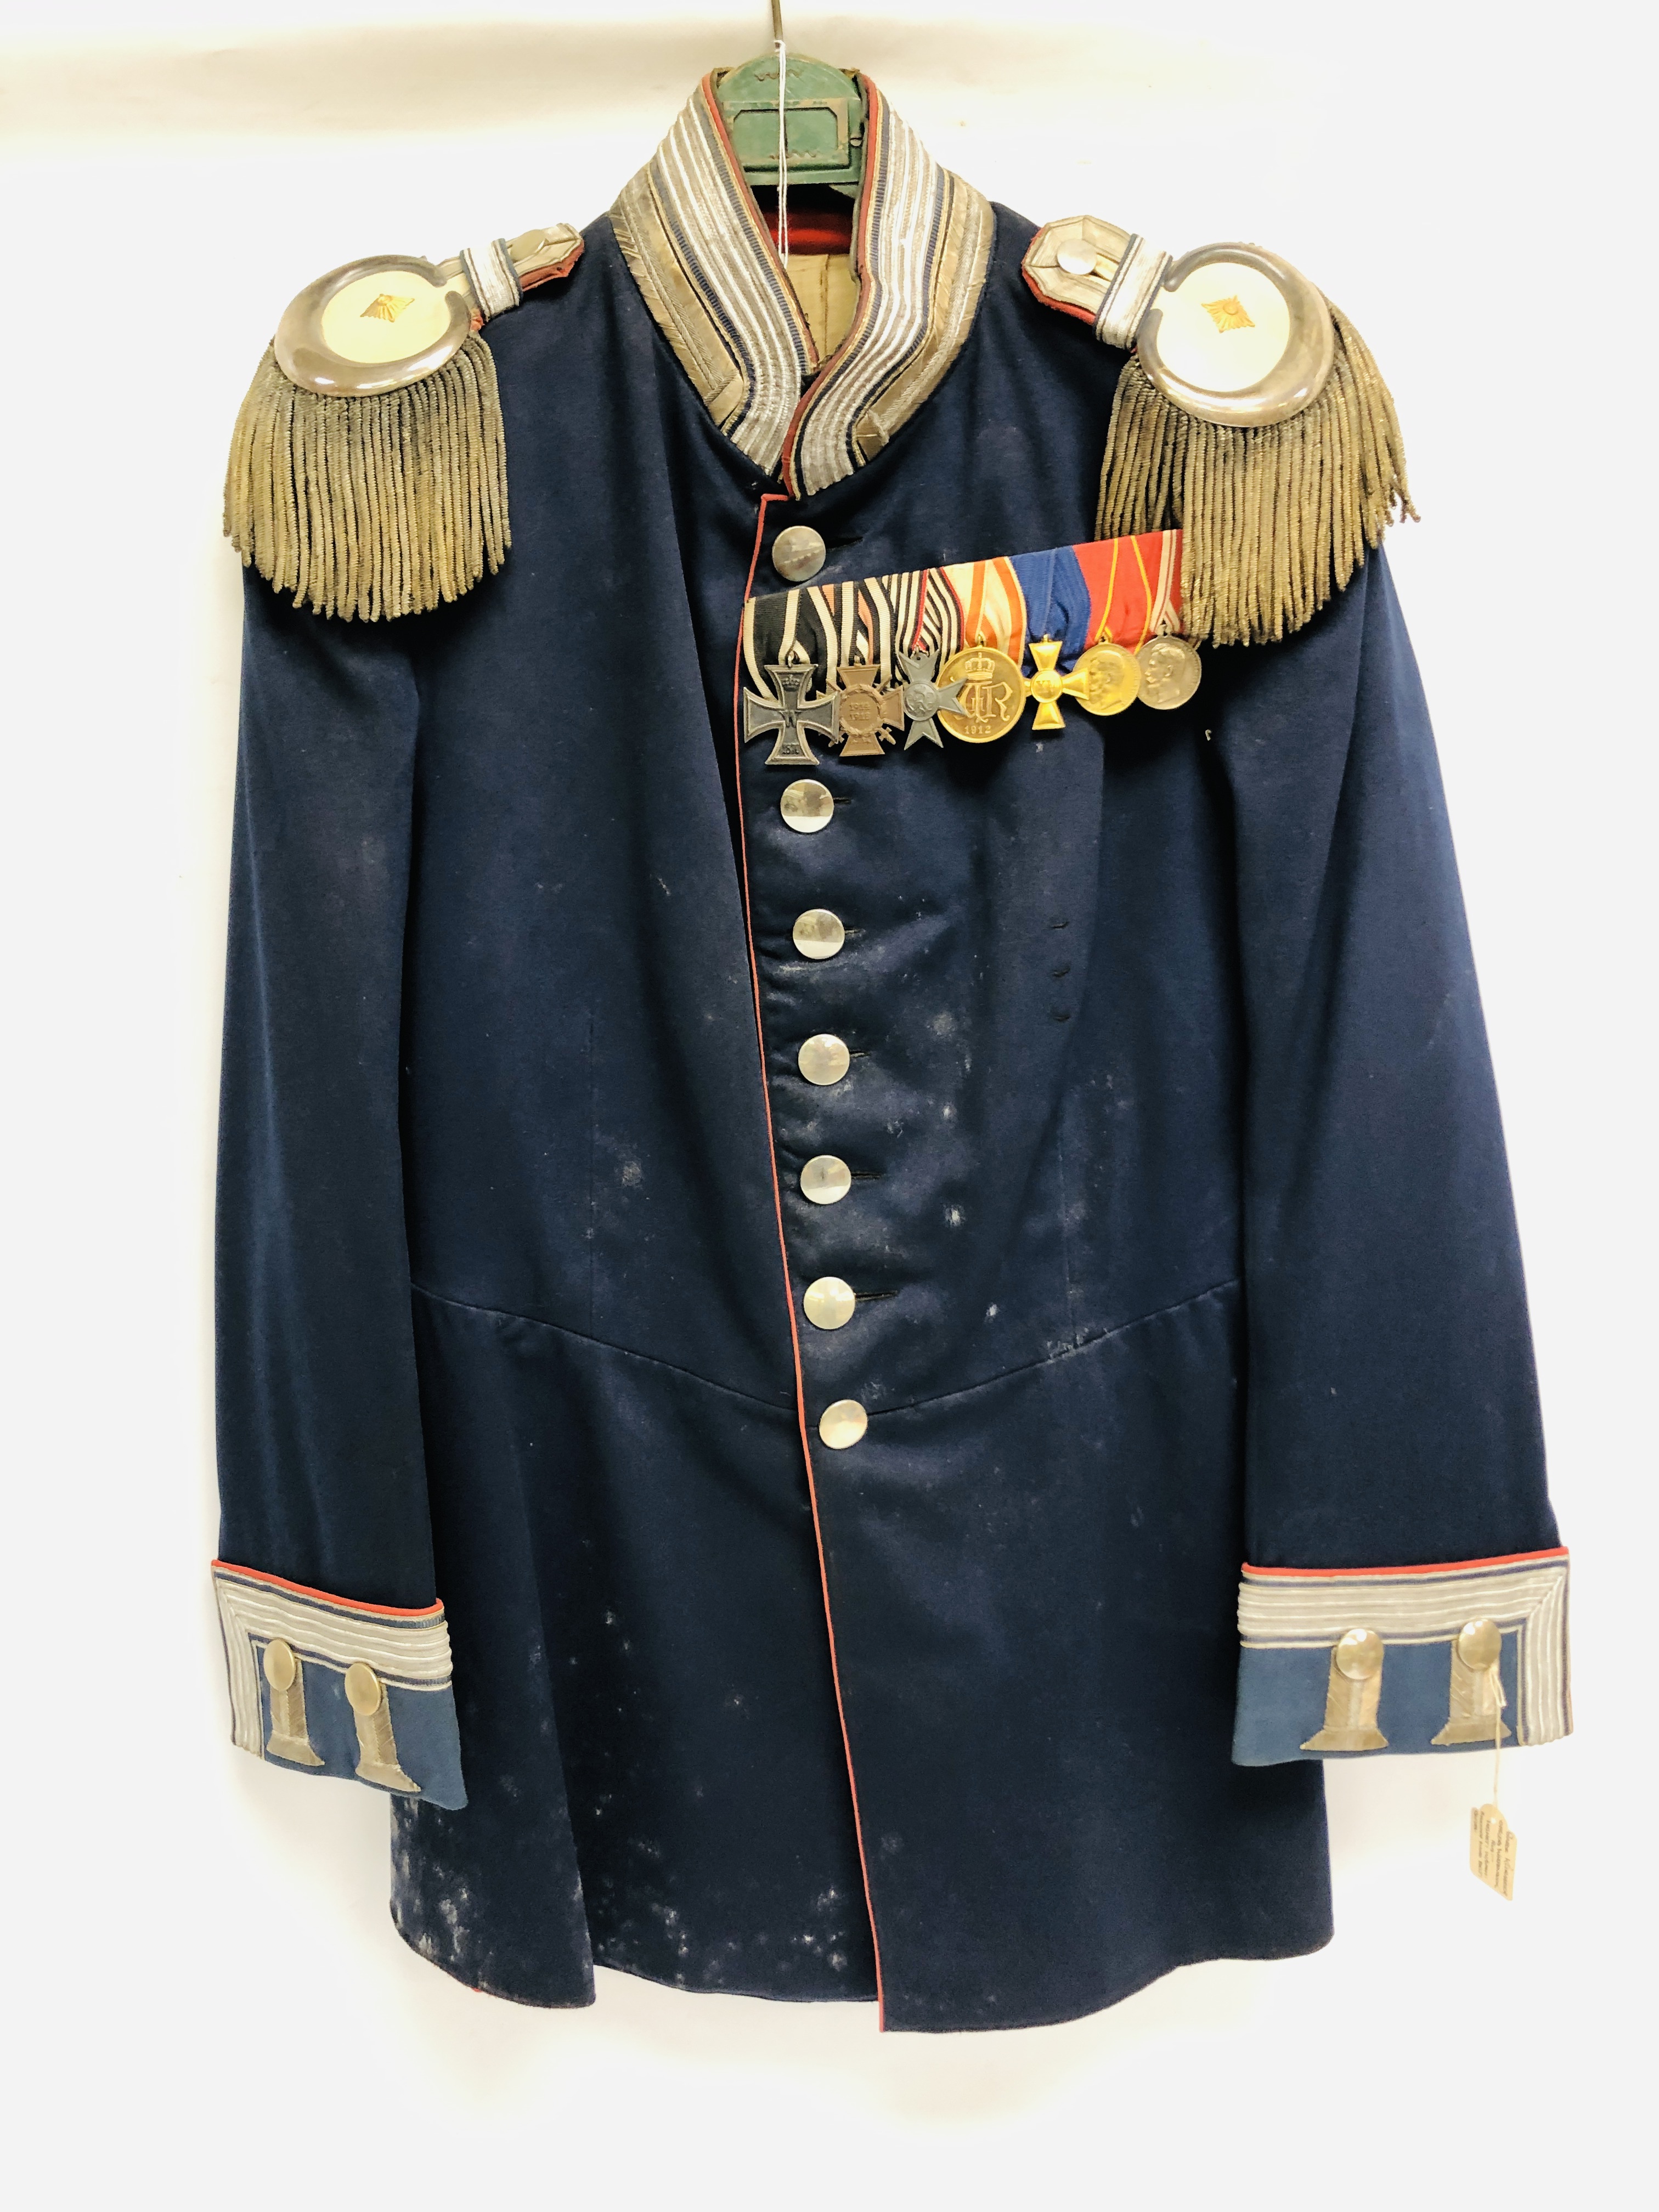 A GERMAN INFANTRY OFFICERS JACKET IN NAVY CLOTH,